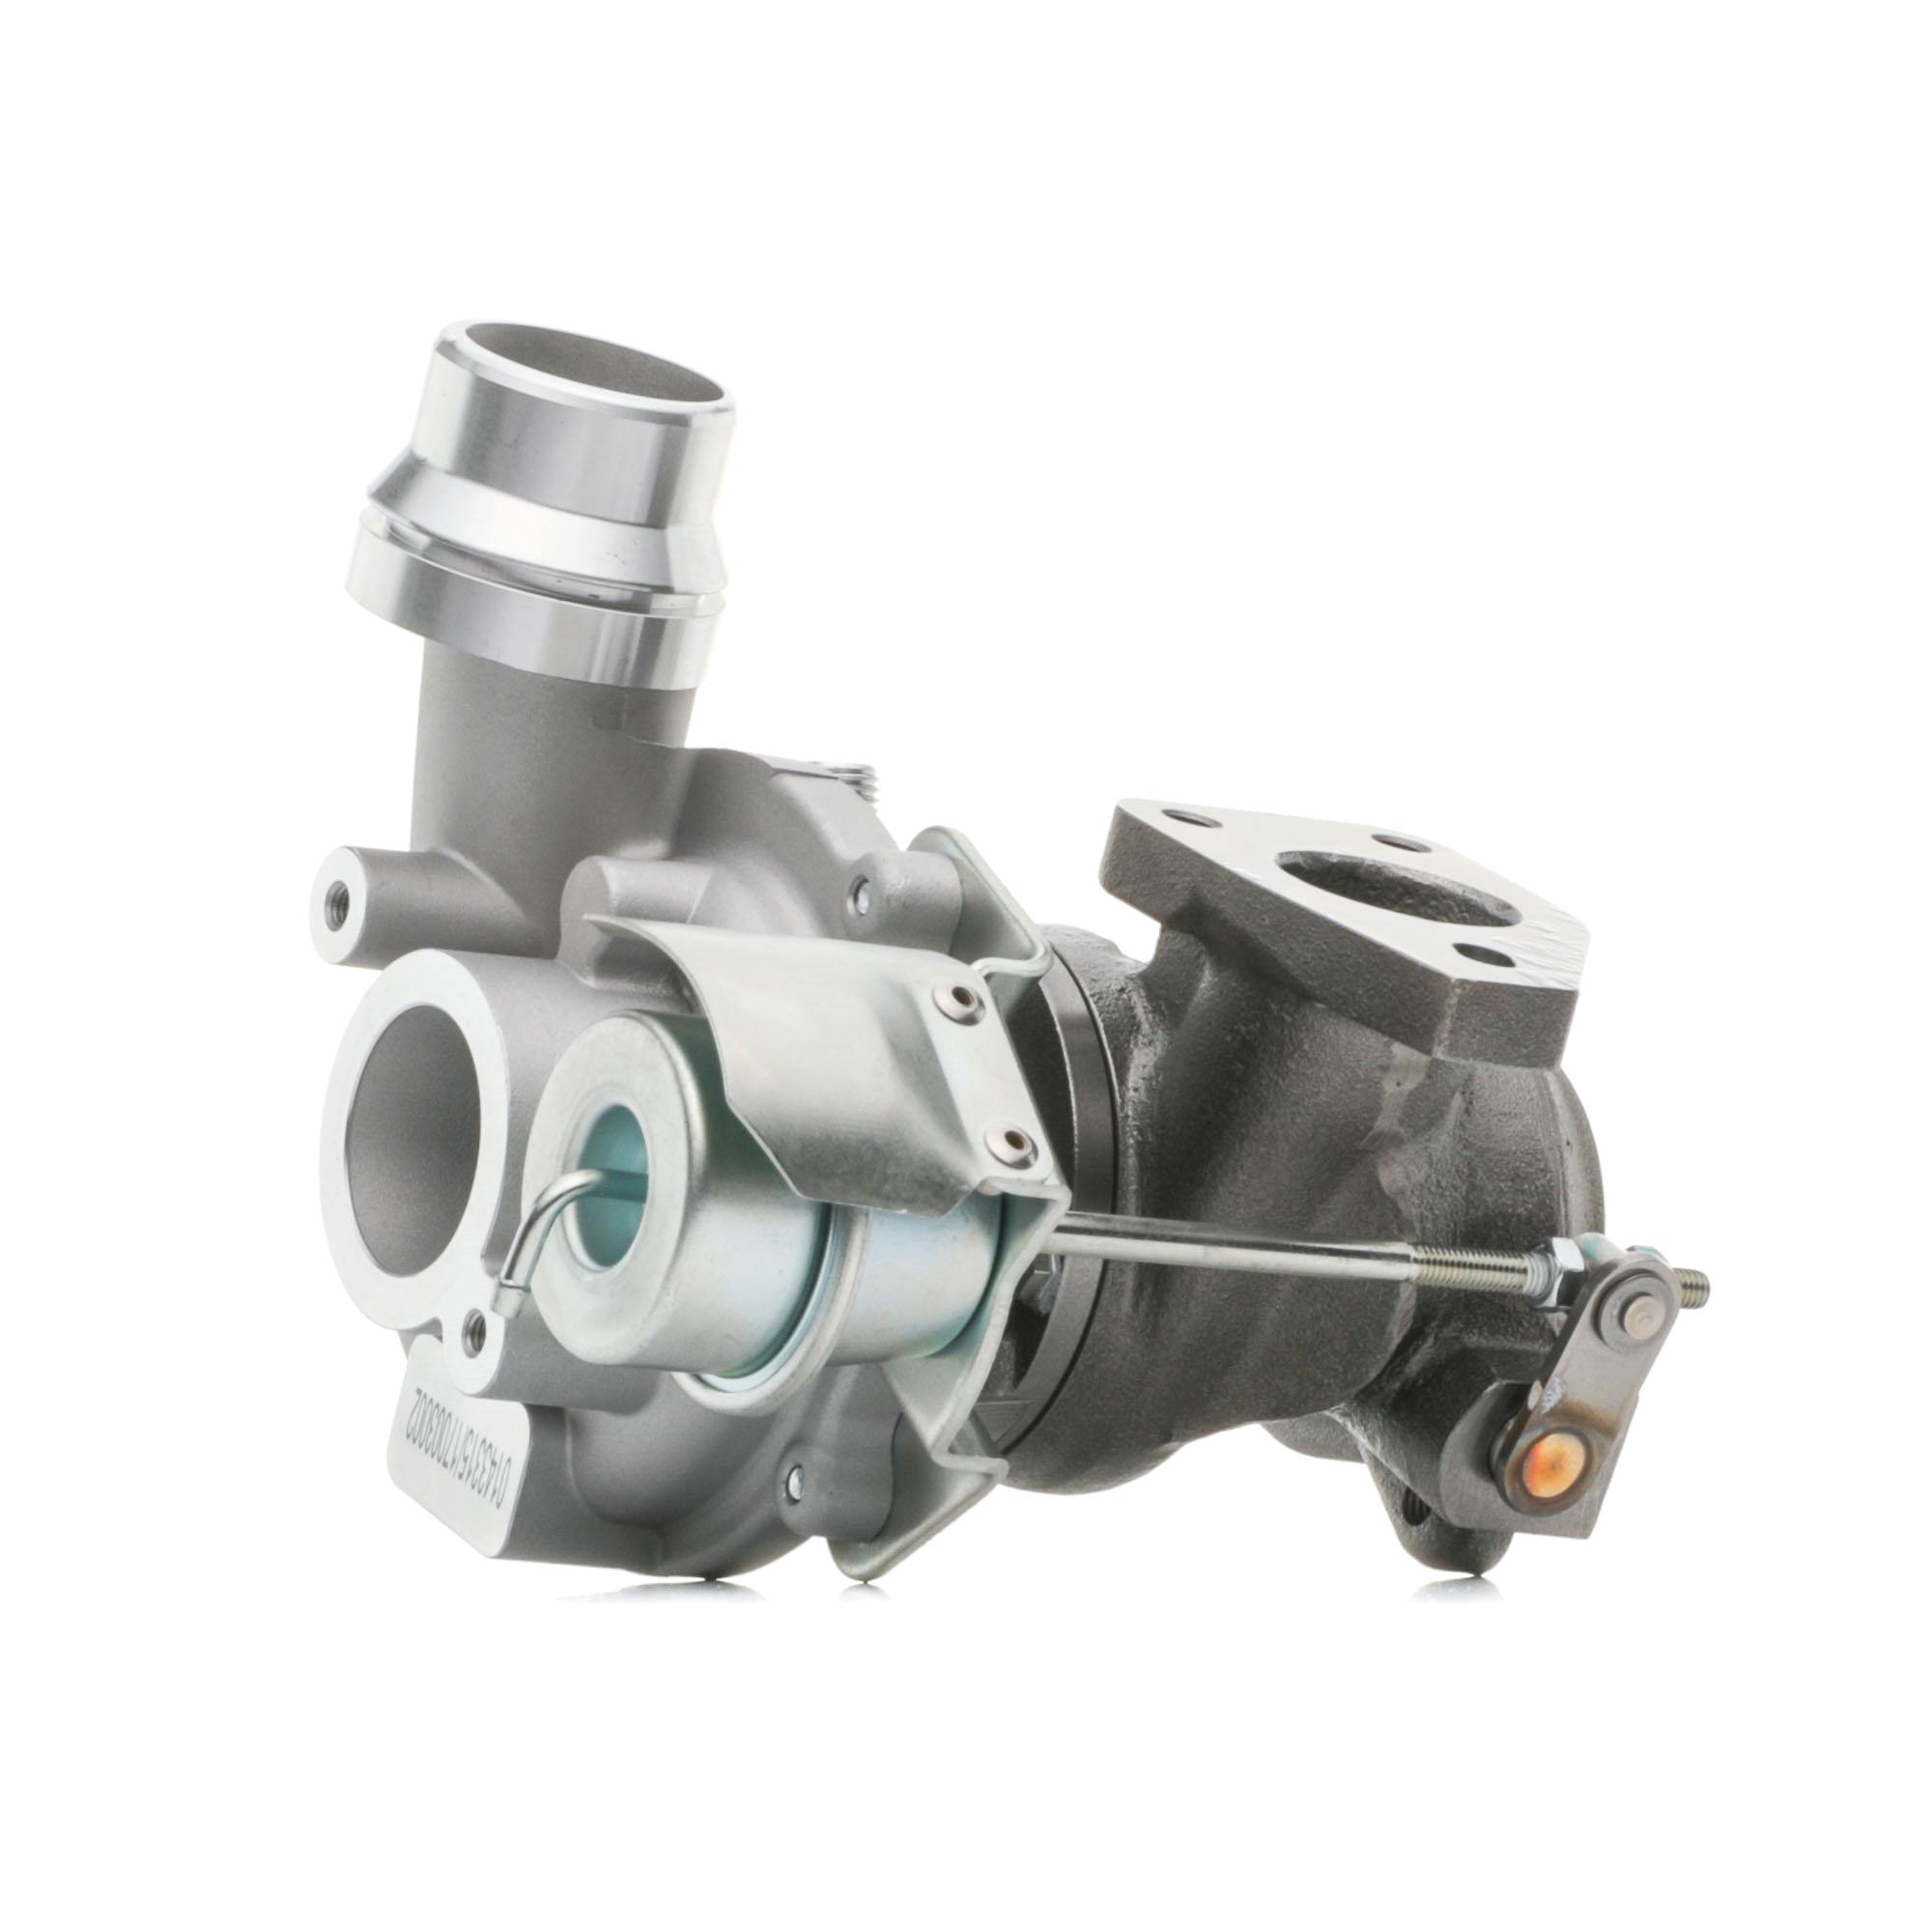 STARK SKCT-1191147 Turbocharger Exhaust Turbocharger, Pneumatic, with gaskets/seals